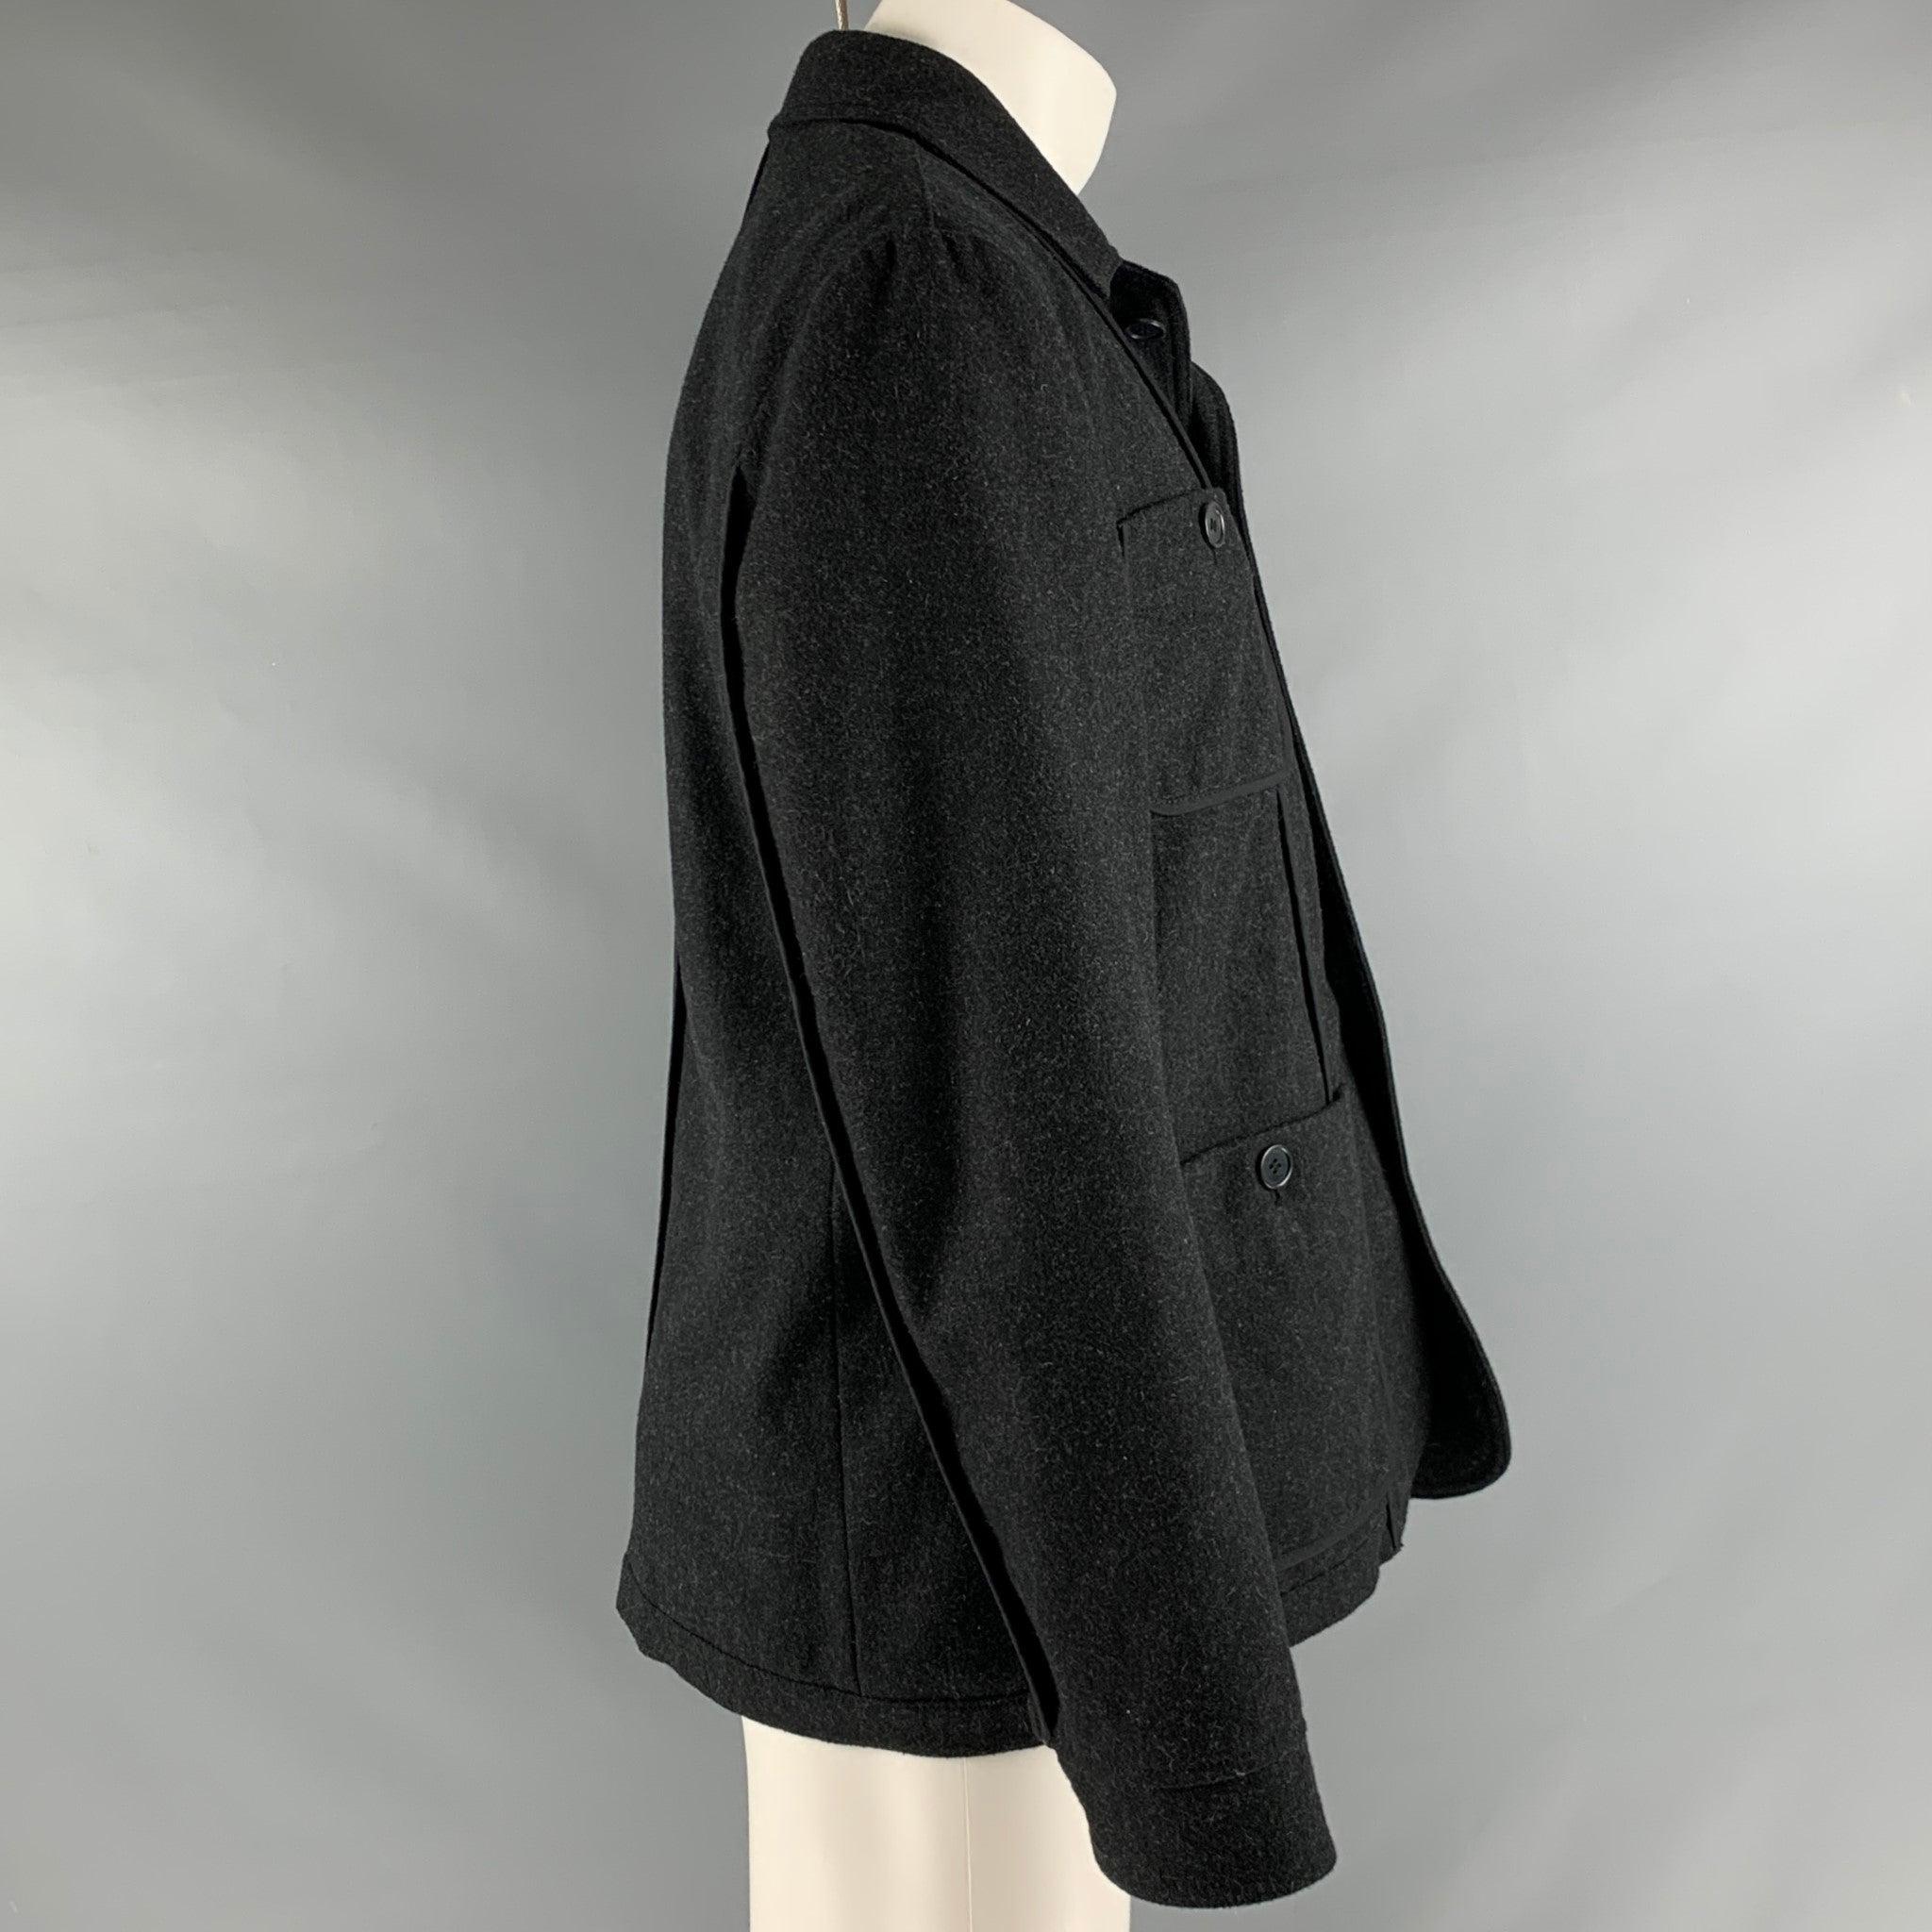 JOHN VARVATOS jacket in a black polyester blend featuring a single breasted style and four buttoned pockets.Very Good Pre-Owned Condition. Minor signs of wear. 

Marked:   M 

Measurements: 
 
Shoulder: 17 inches  Chest: 40 inches  Sleeve: 25.5